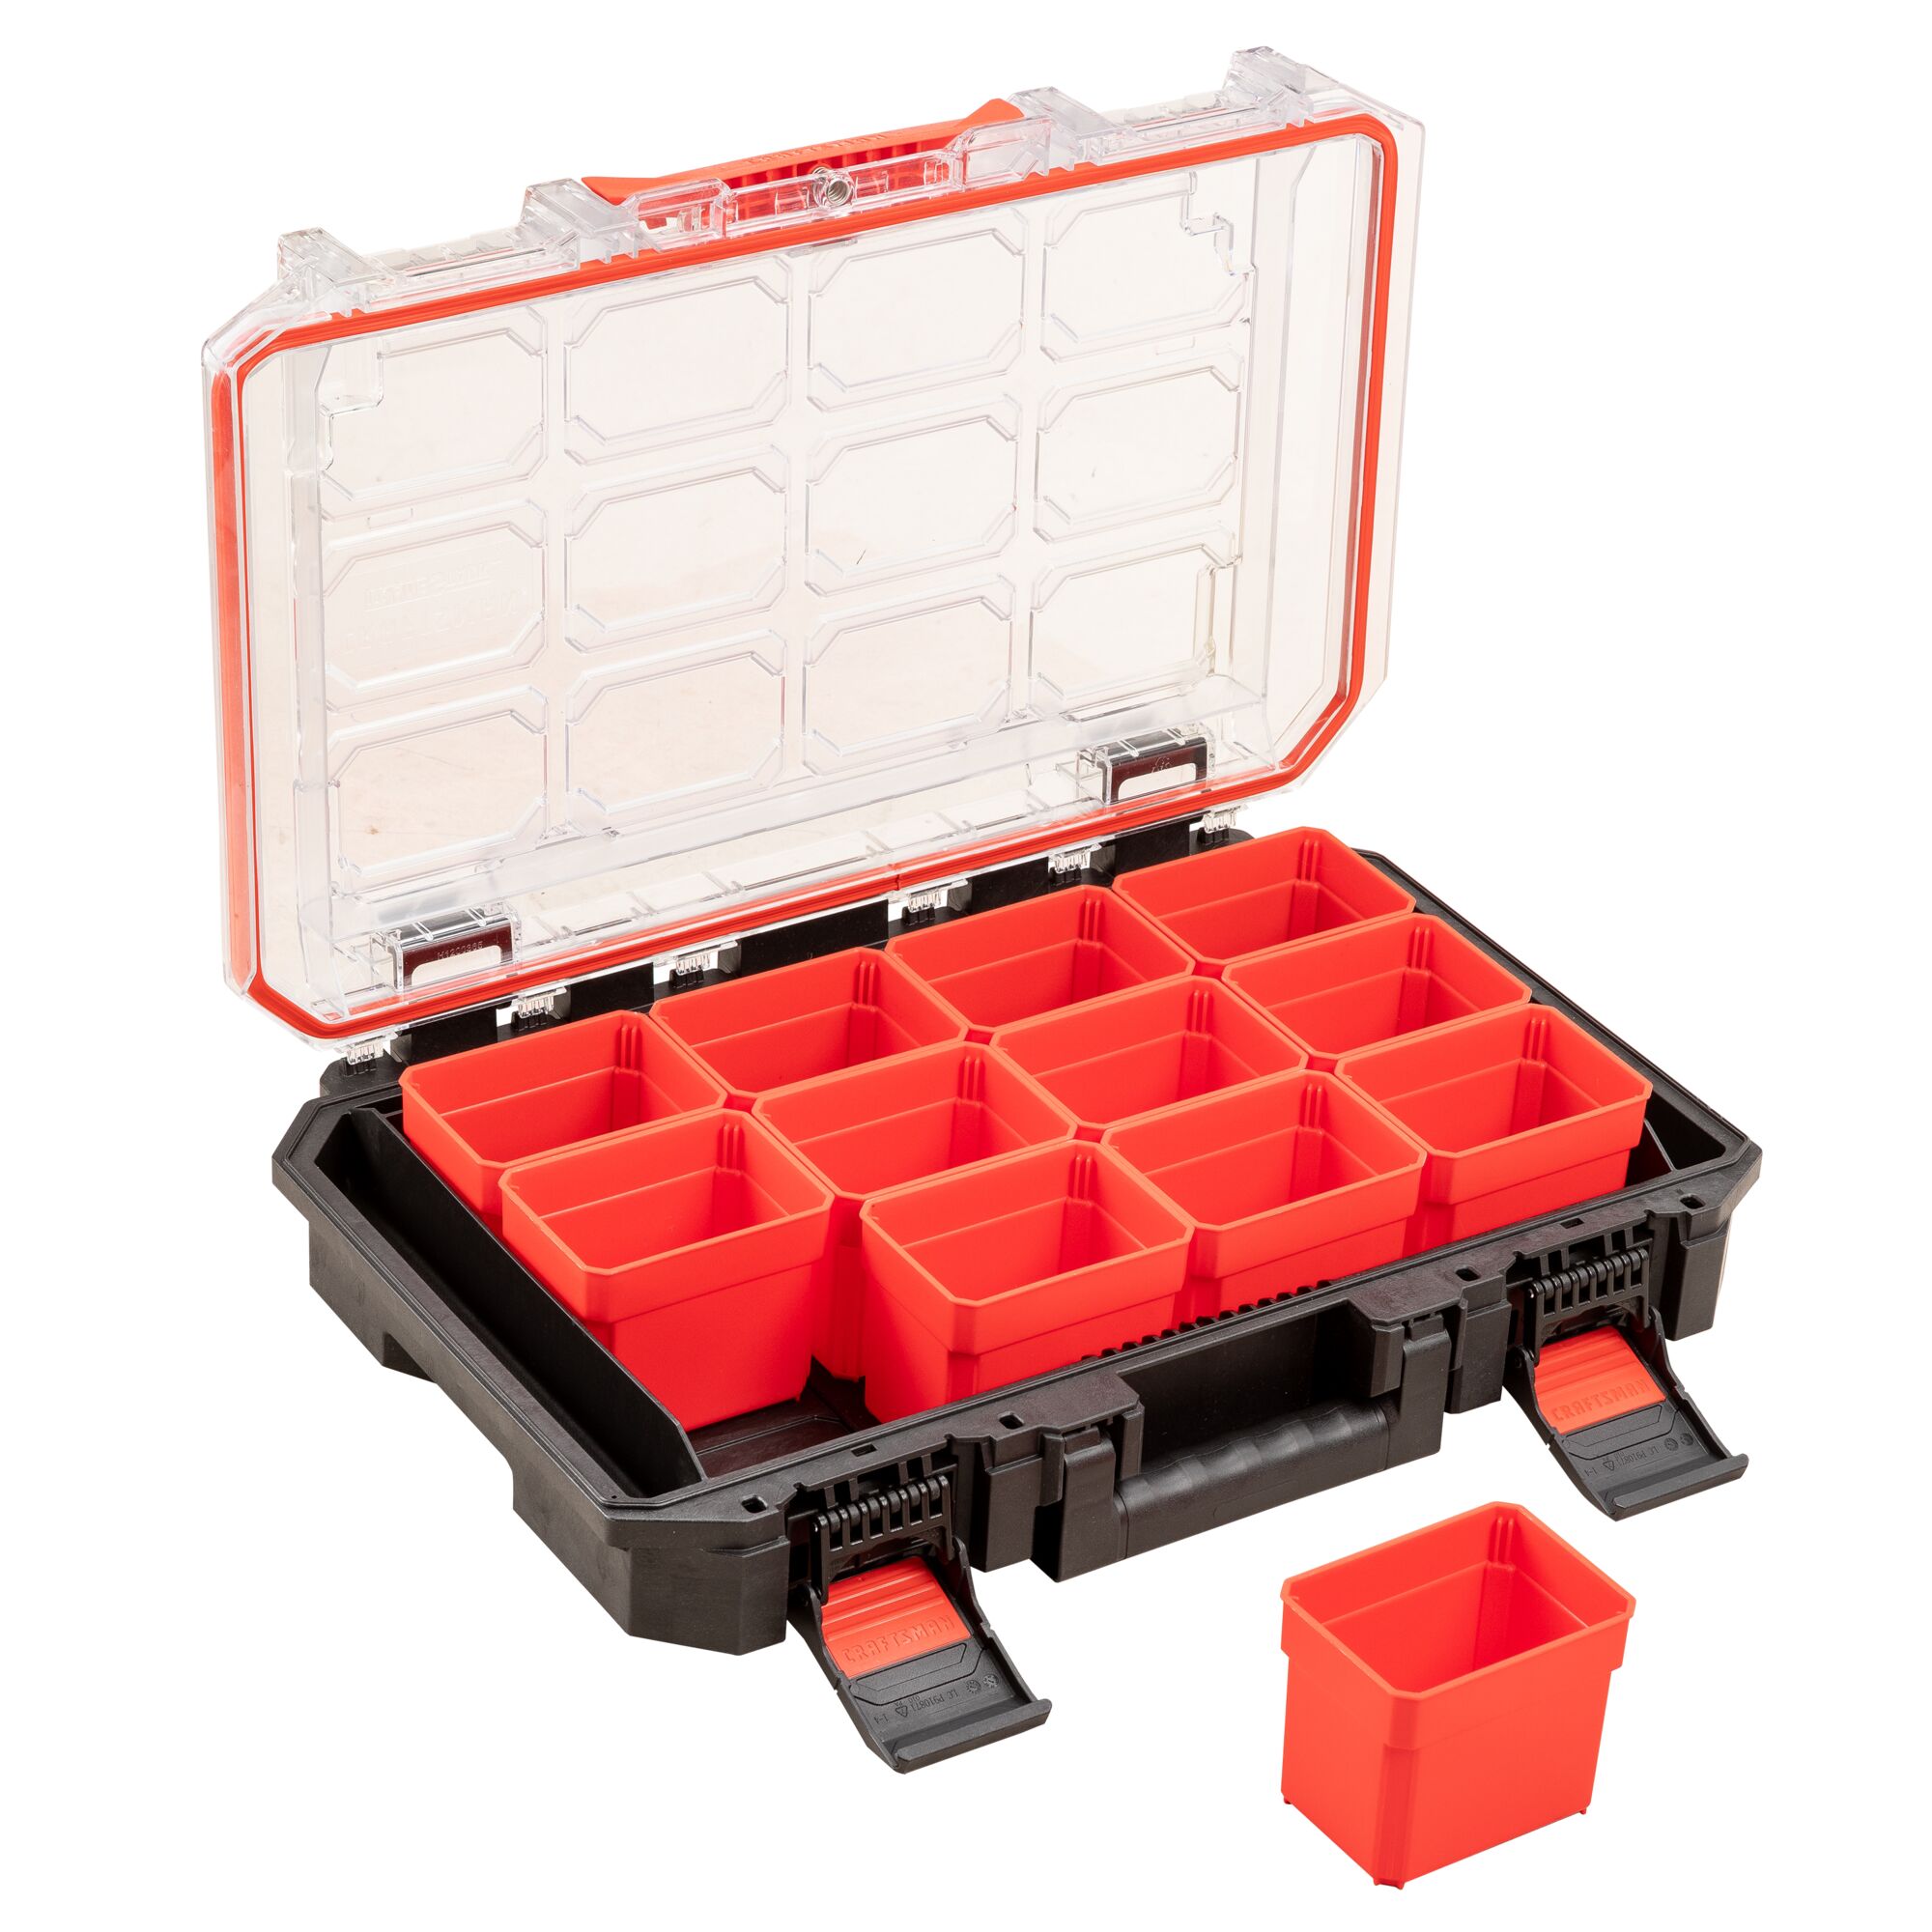 Open organizer case at an angle towards the left with a feature of a container out of the case to the side